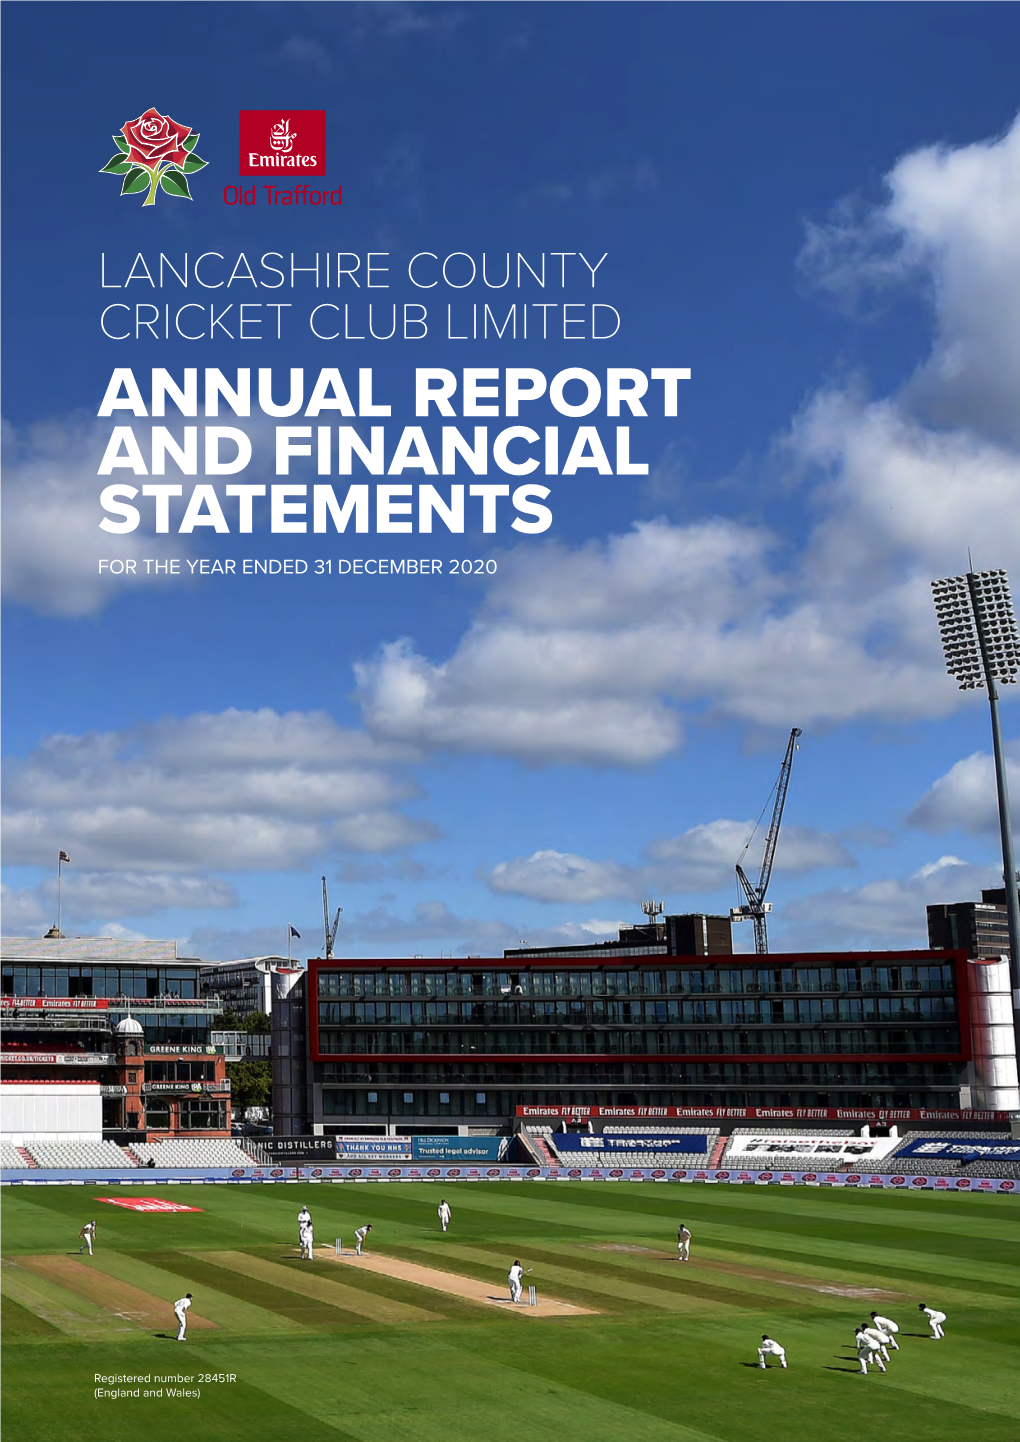 Annual Report and Financial Statements for the Year Ended 31 December 2020